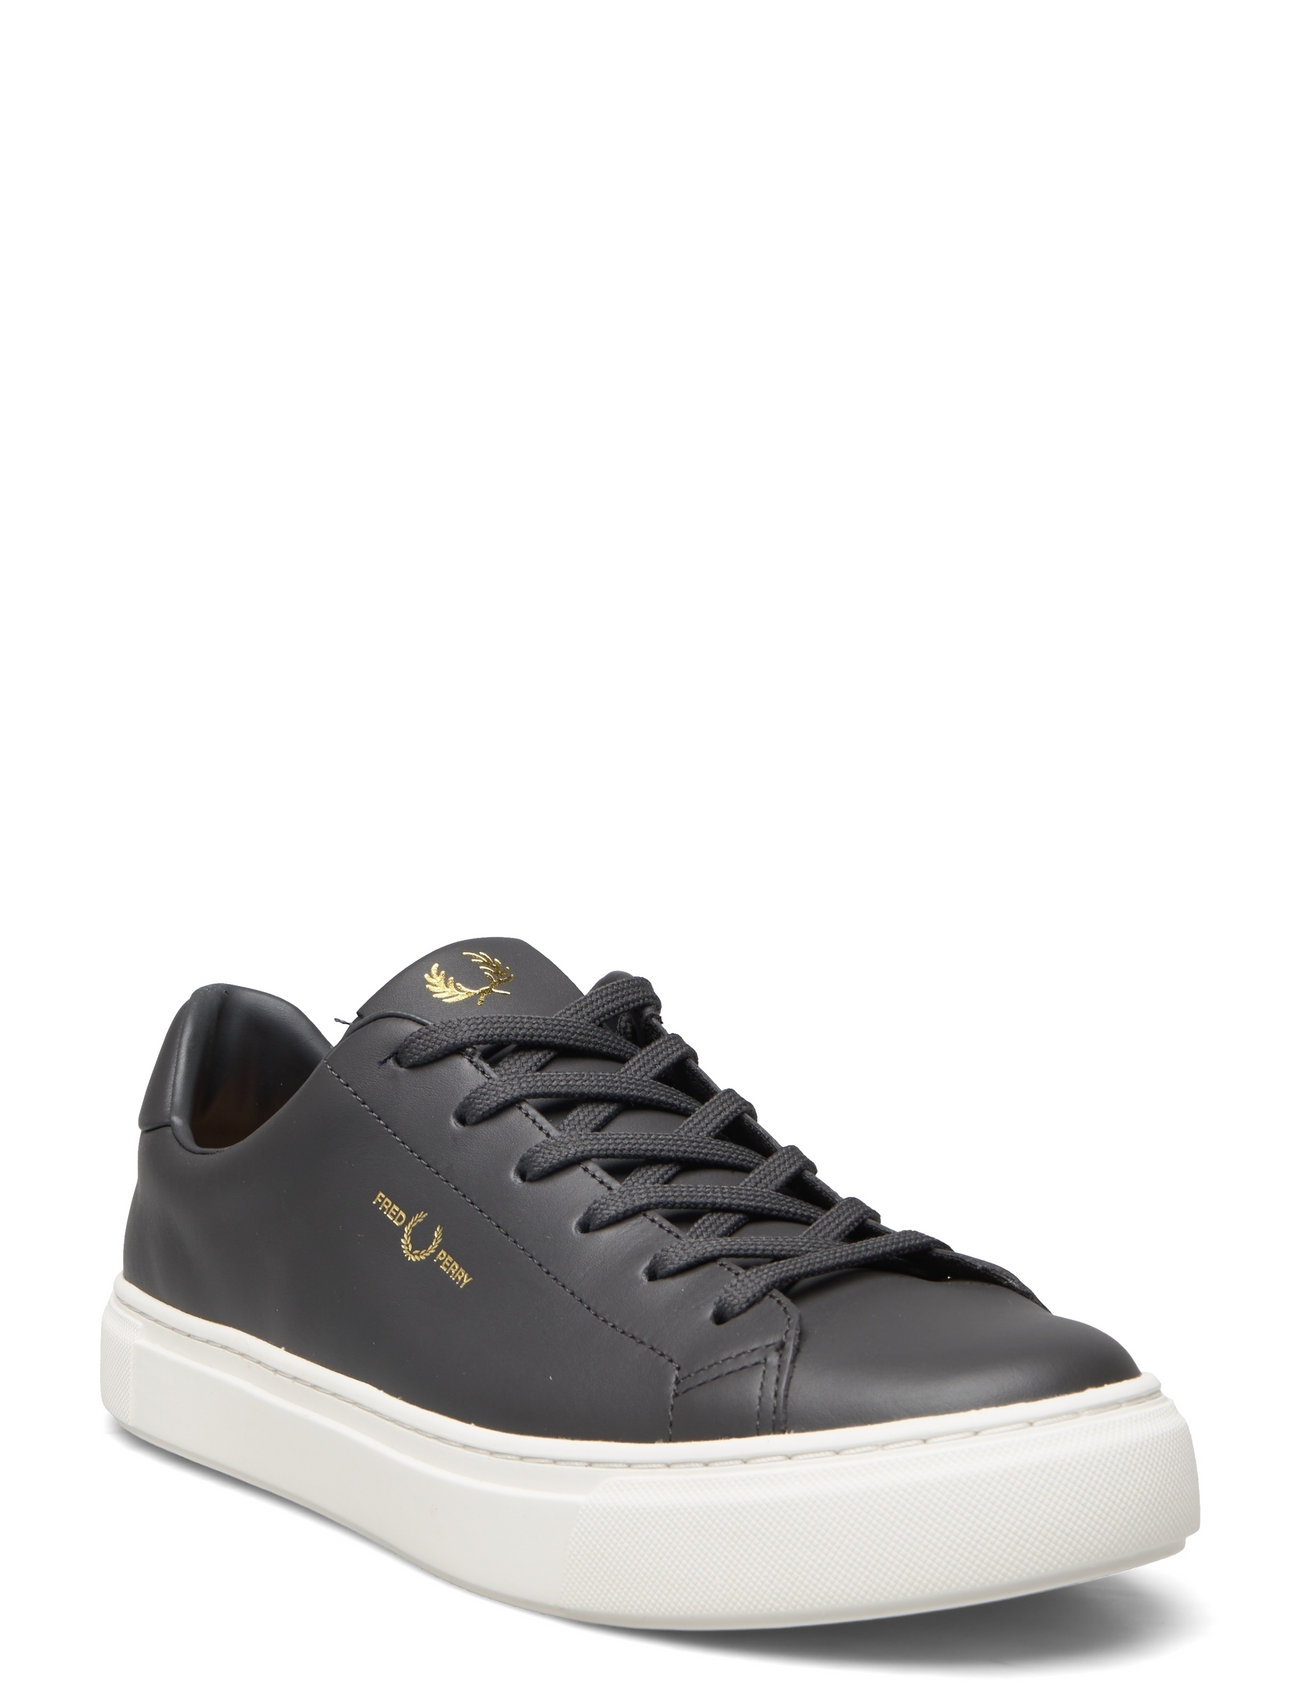 Fred Perry B71 Leather - Lave - Boozt.com